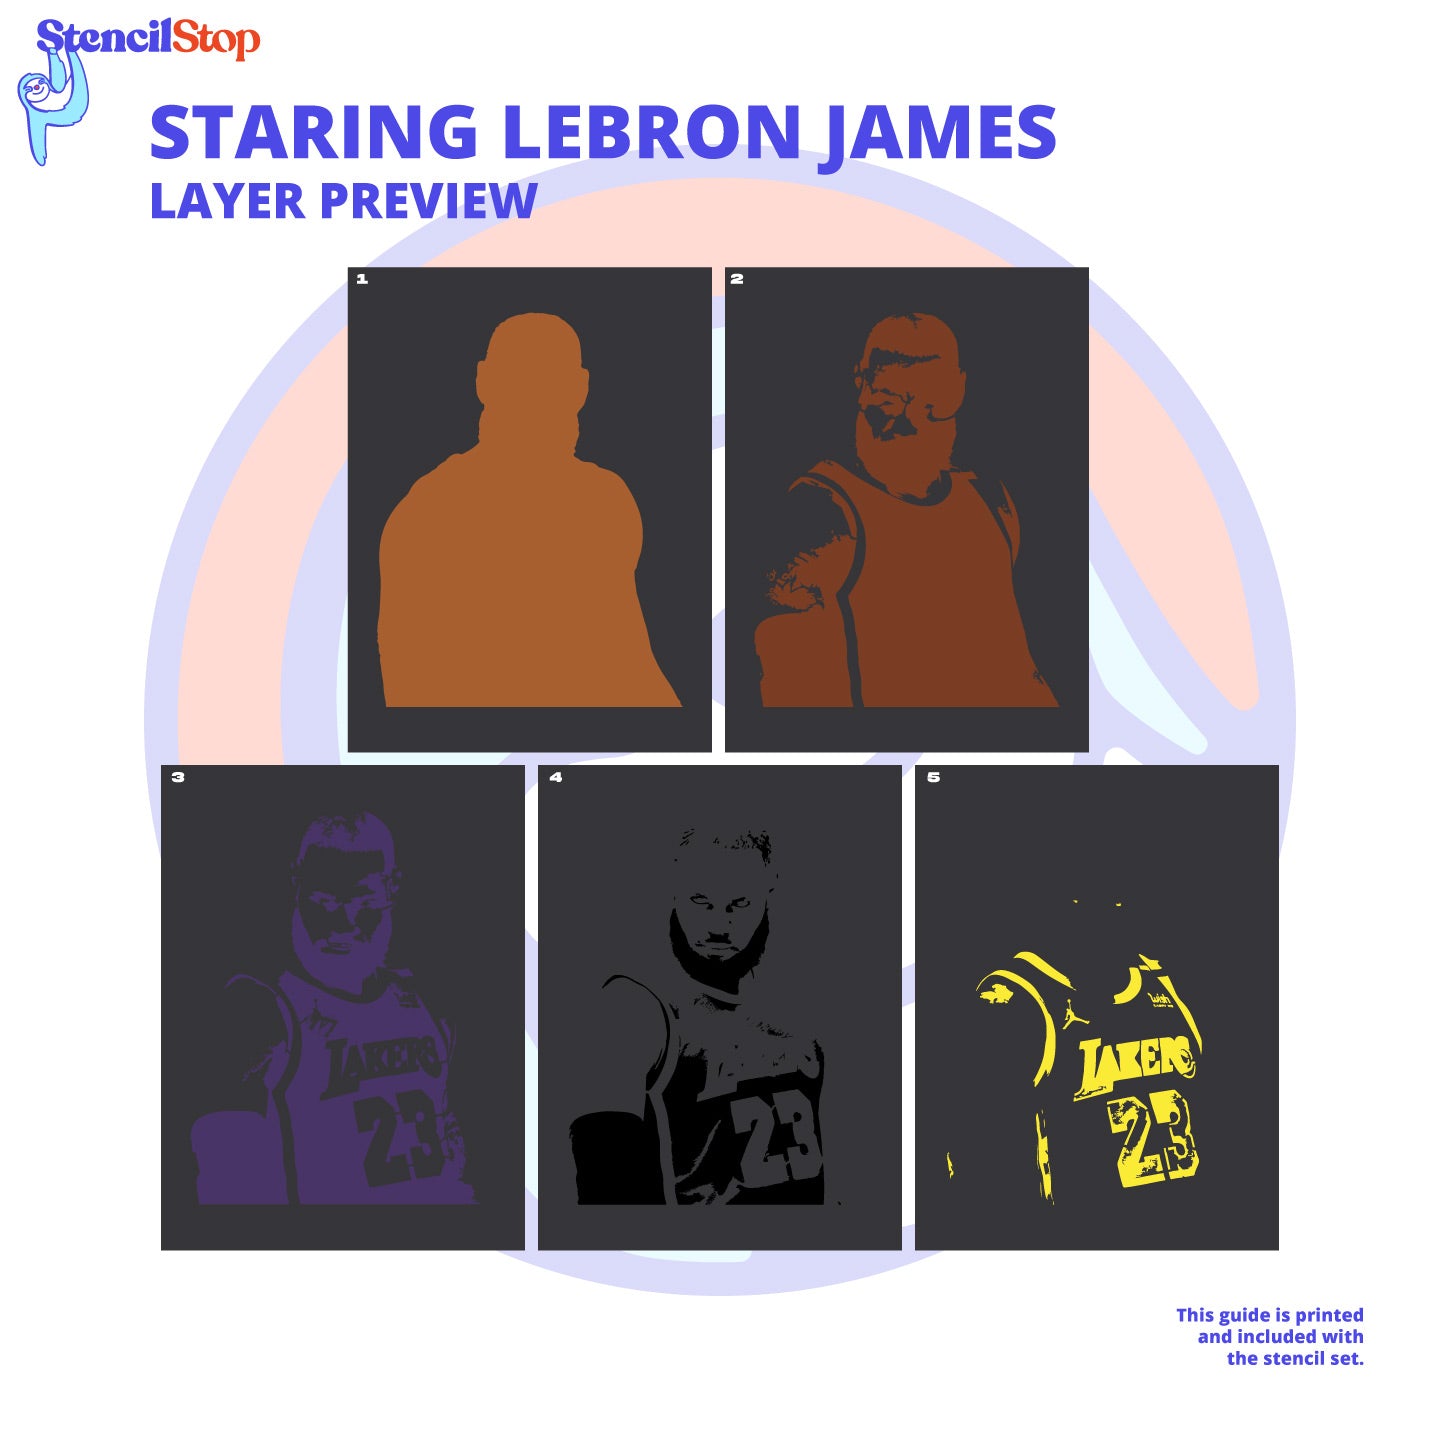 Lebron James "Staring" Layered Stencil Preview